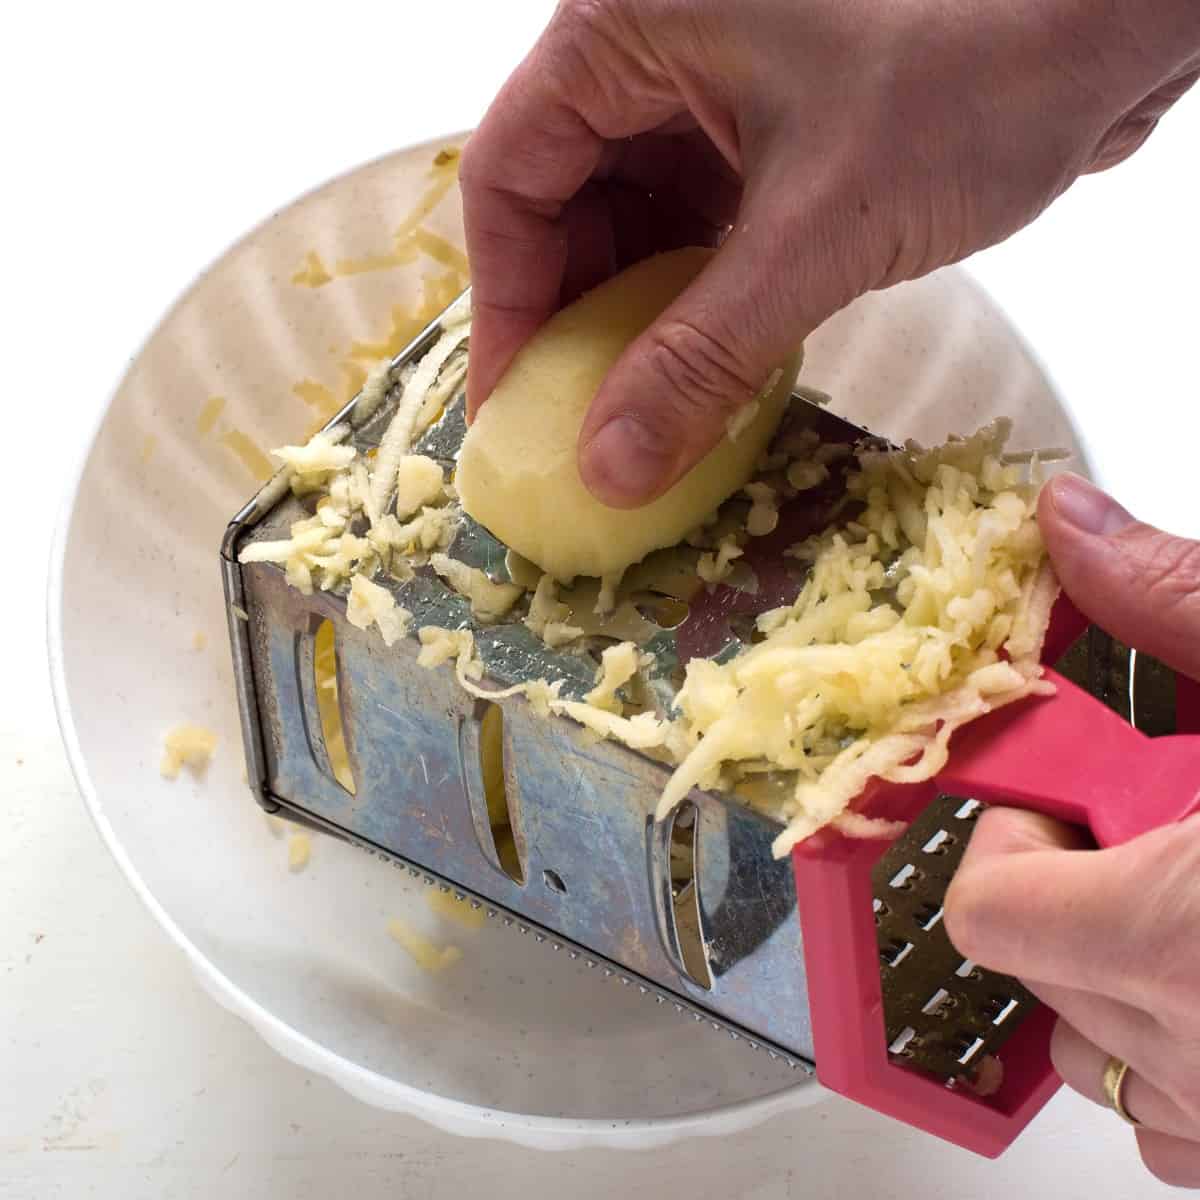 How to shred apples on hand box grater.